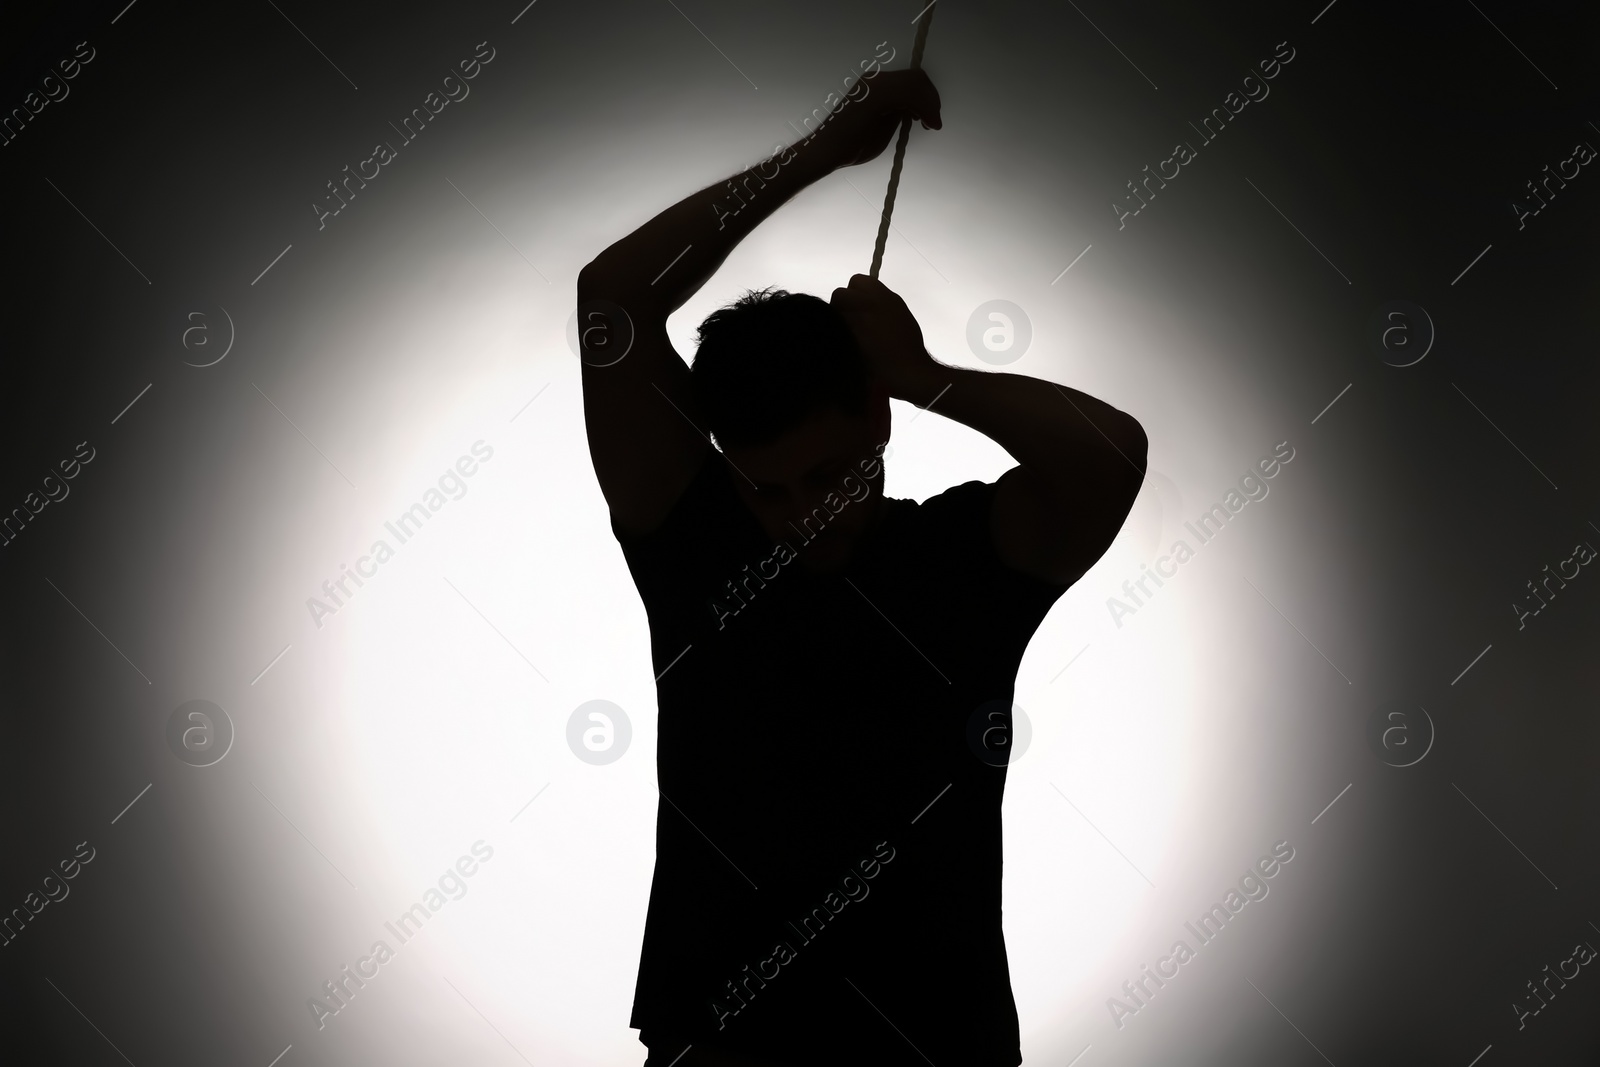 Photo of Silhouette of man with rope noose on neck against light background